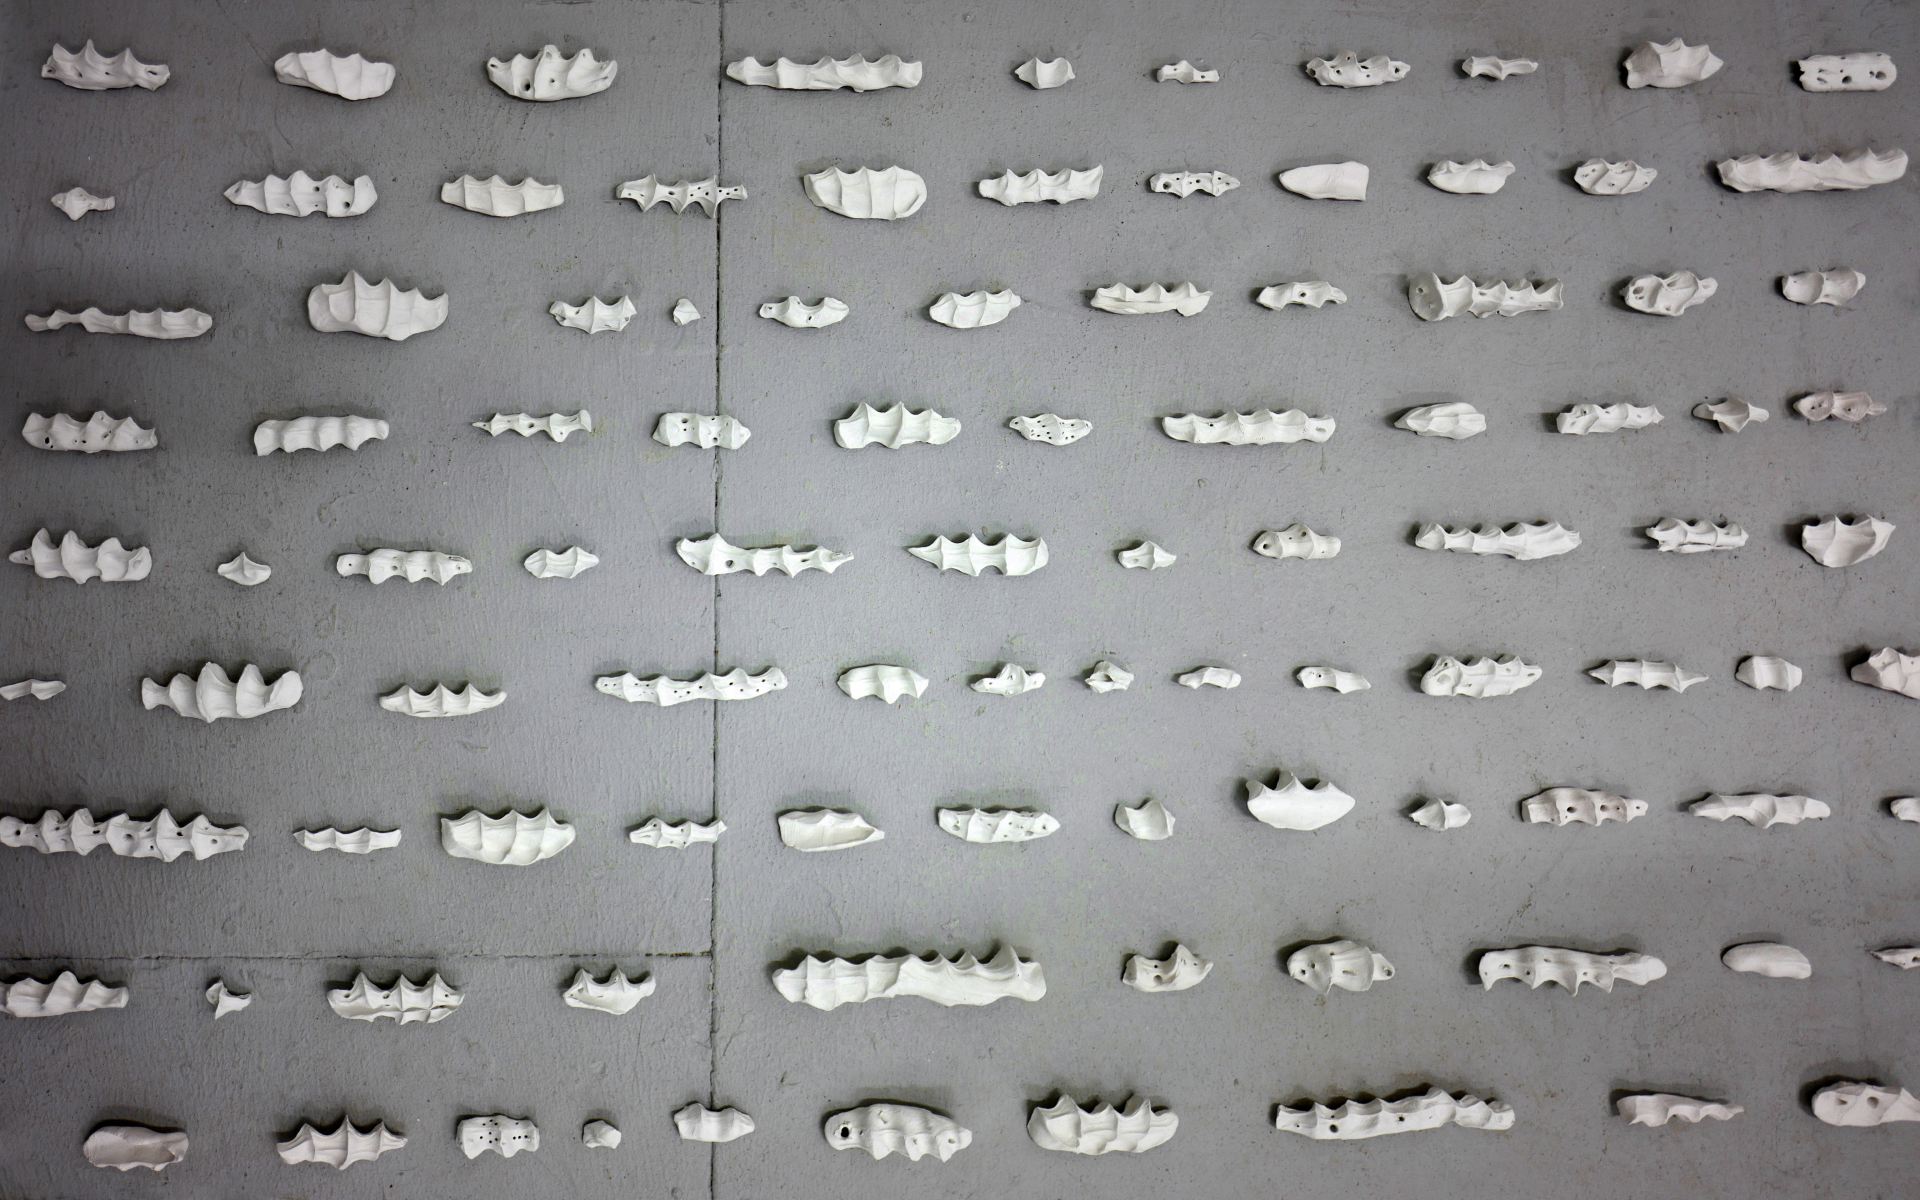 Documentation of several horizontally arranged lines of white clay sculptures against a grey floor.